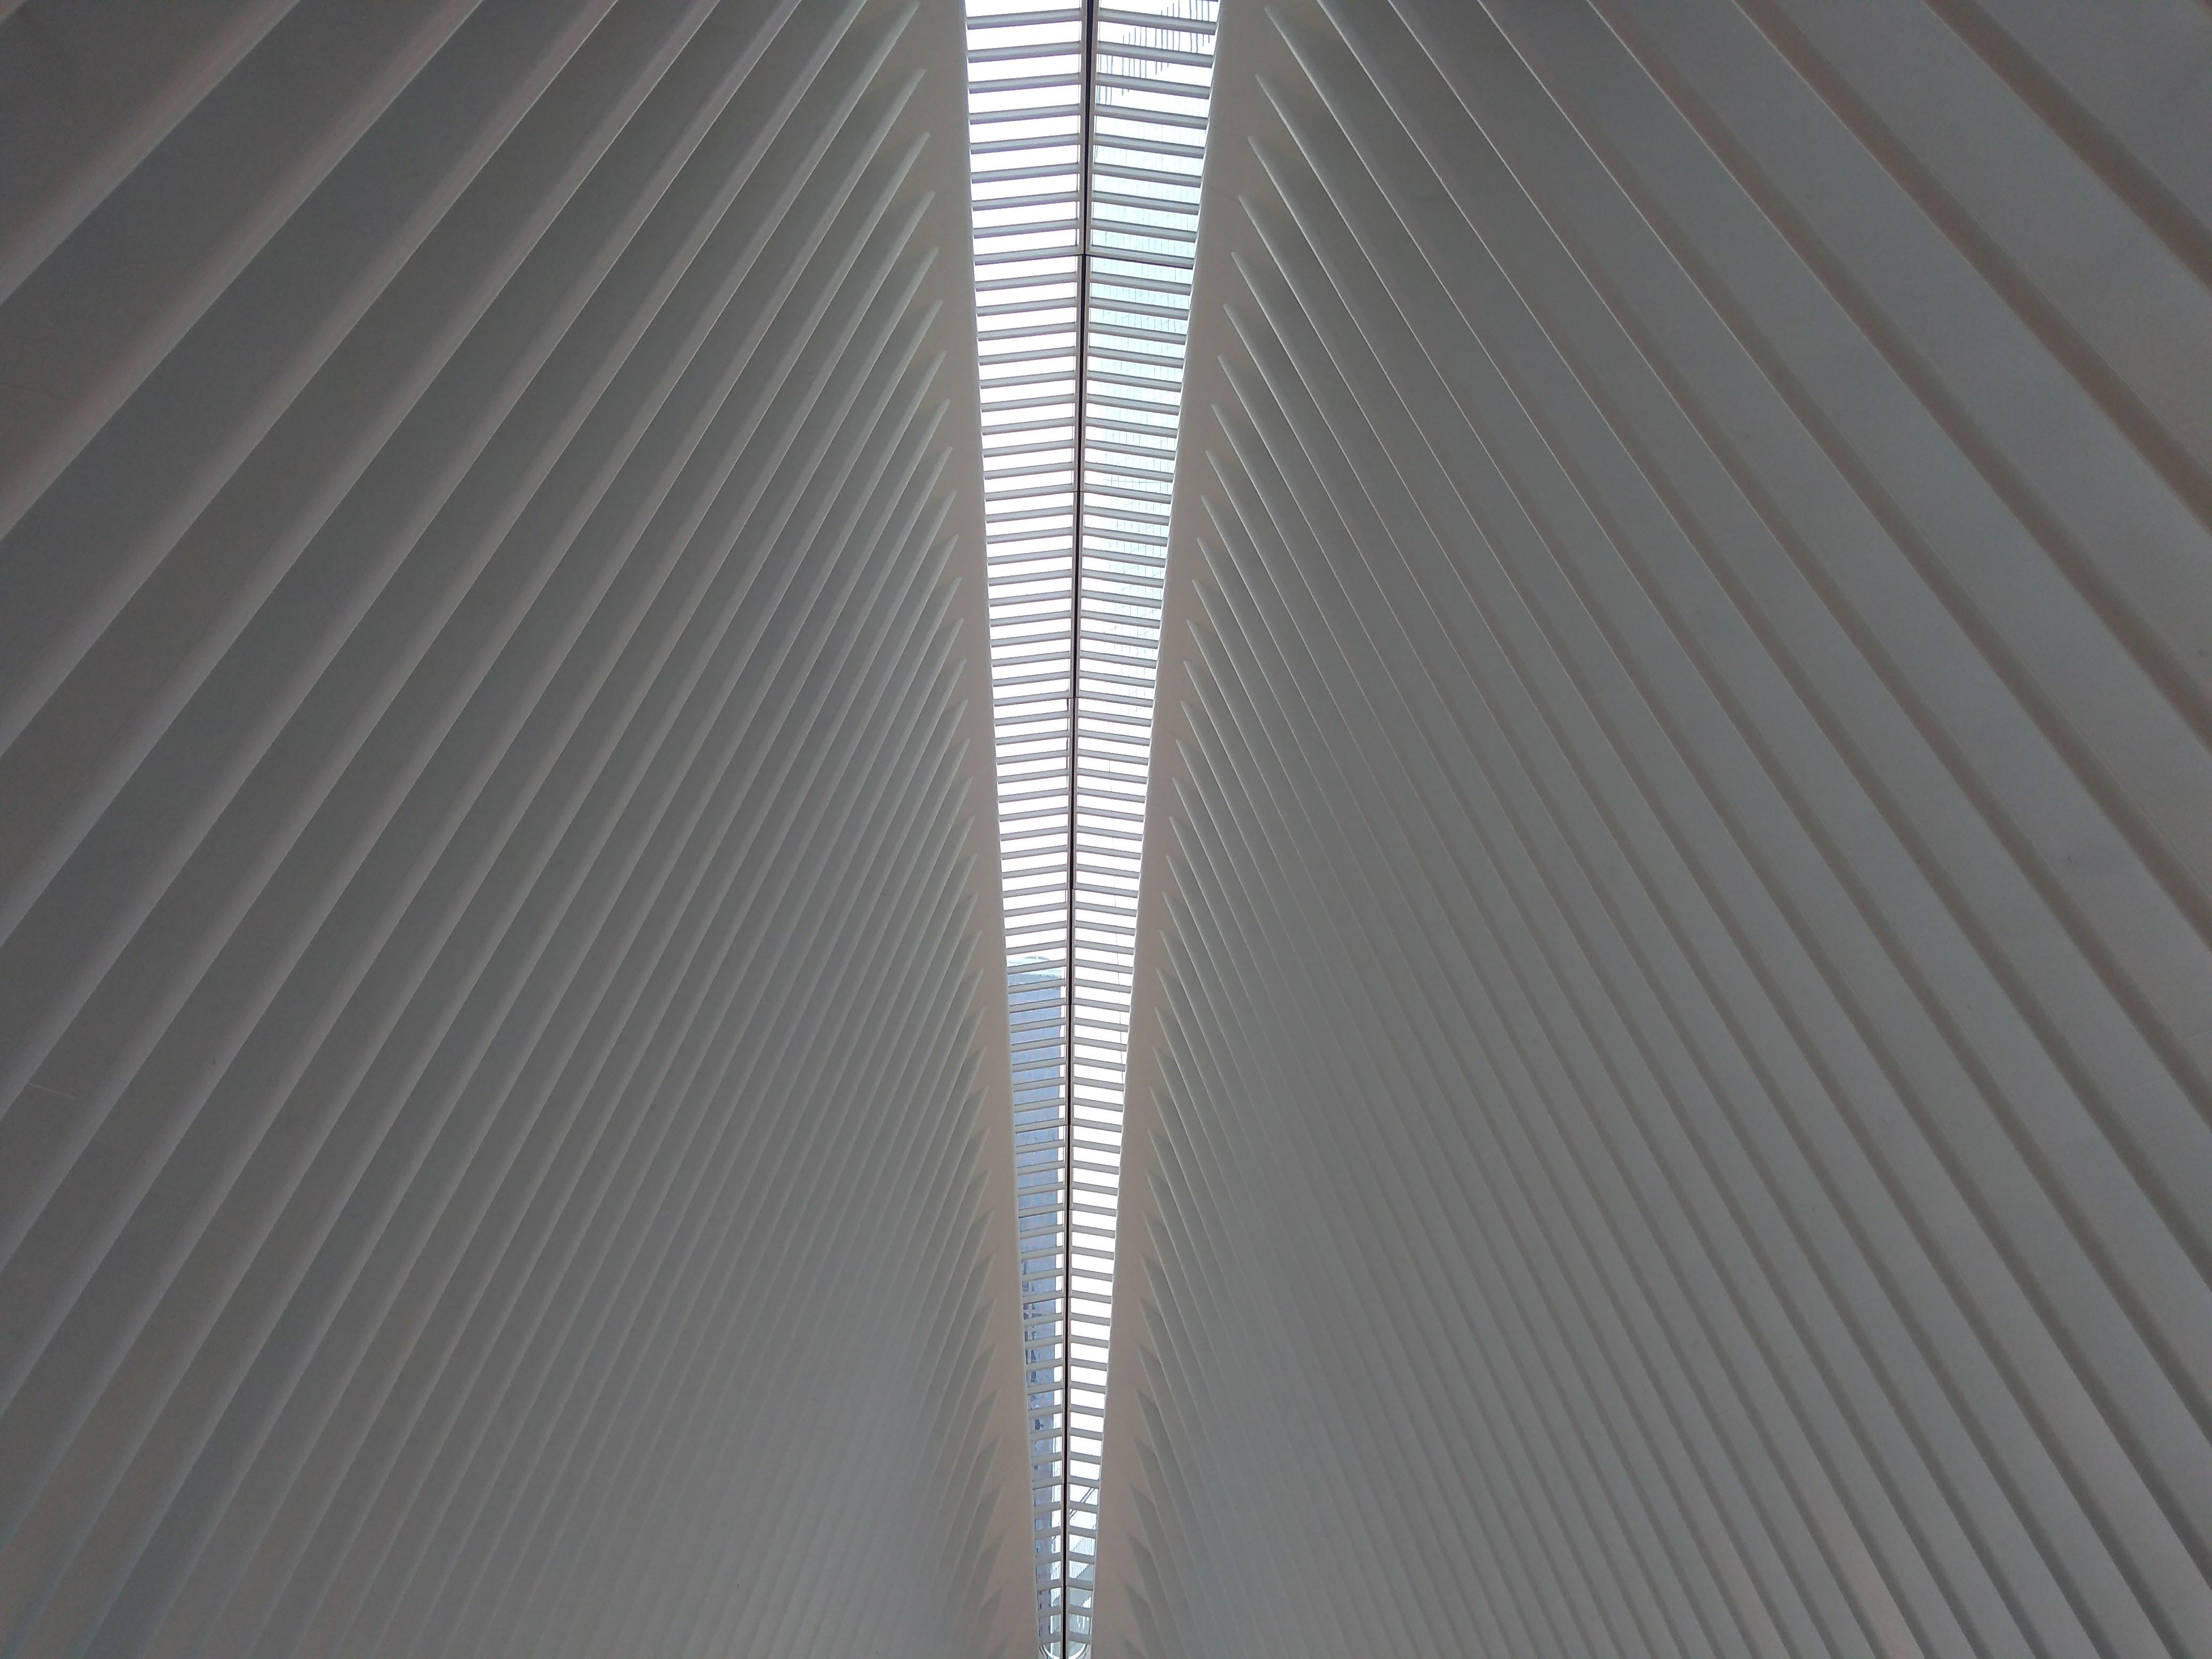 Welcome to World Trade Centre PATH Station aka The Oculus, New York, USA (Photo by RobAO)